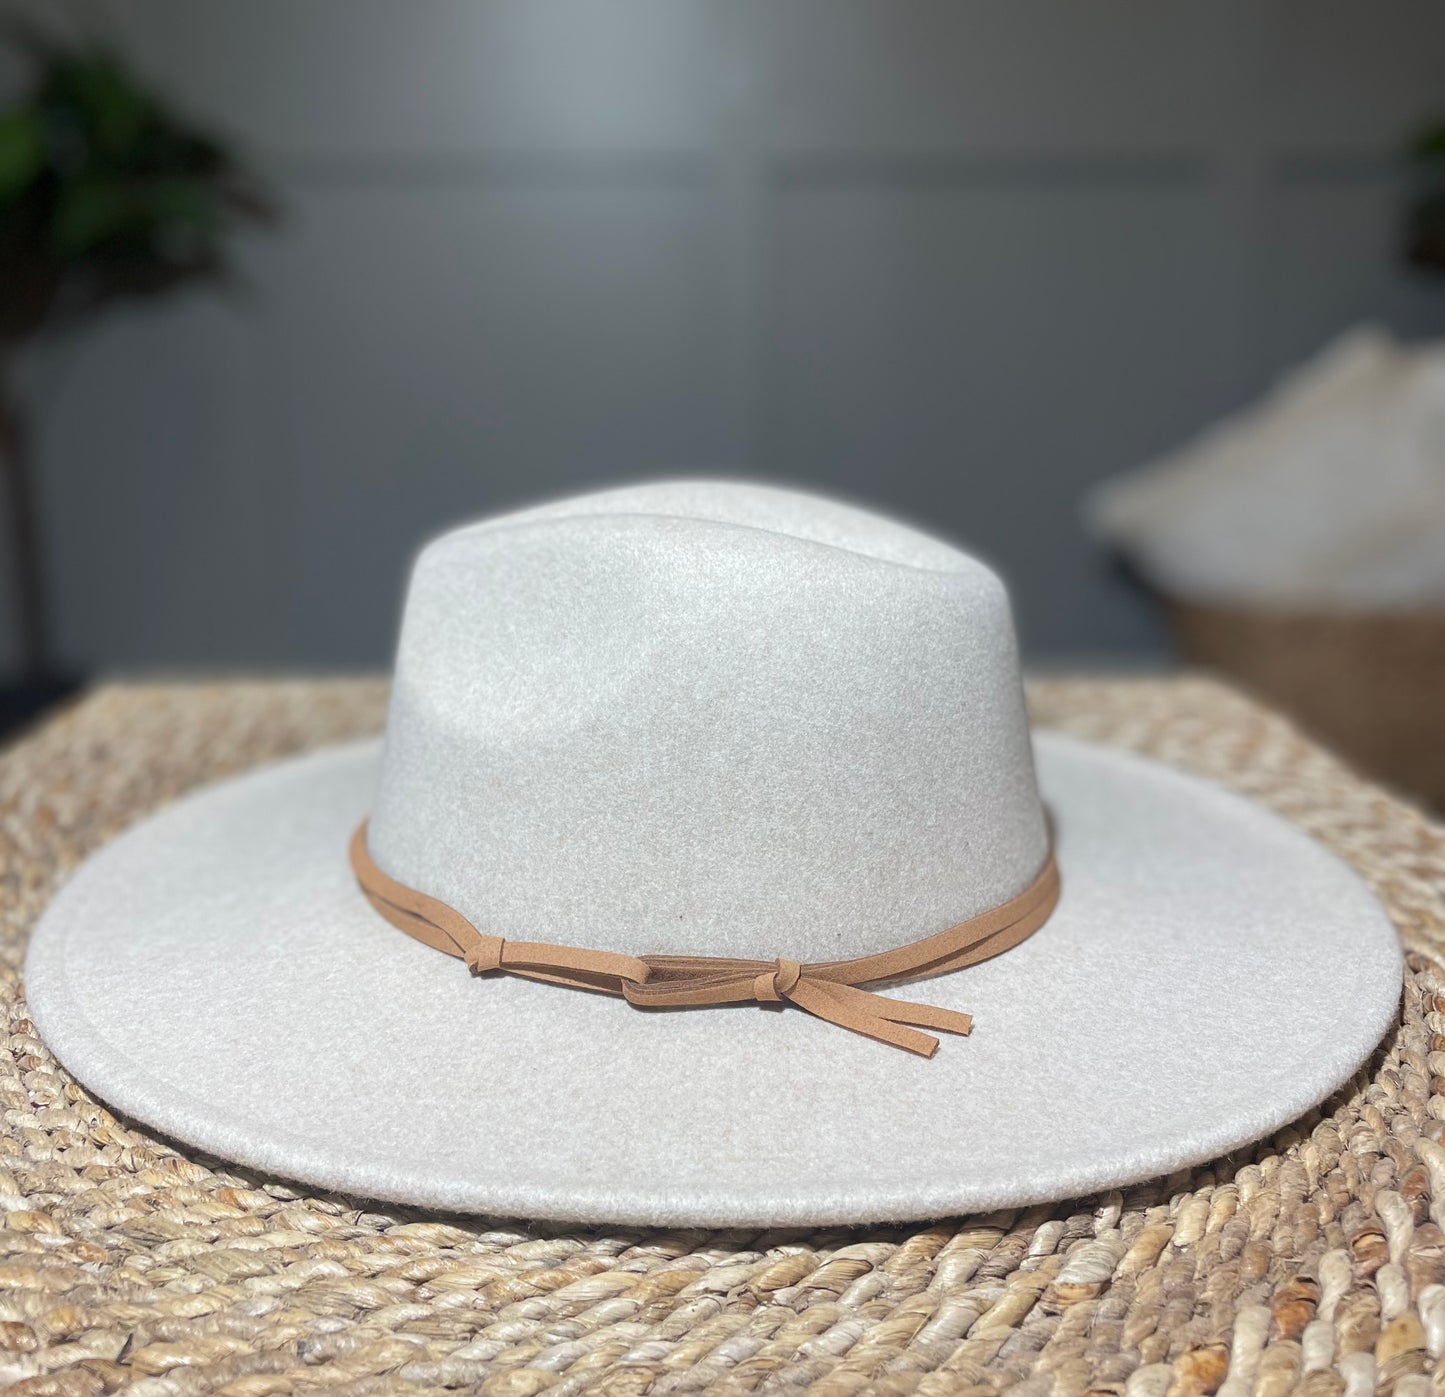 The Wear Everywhere Hat